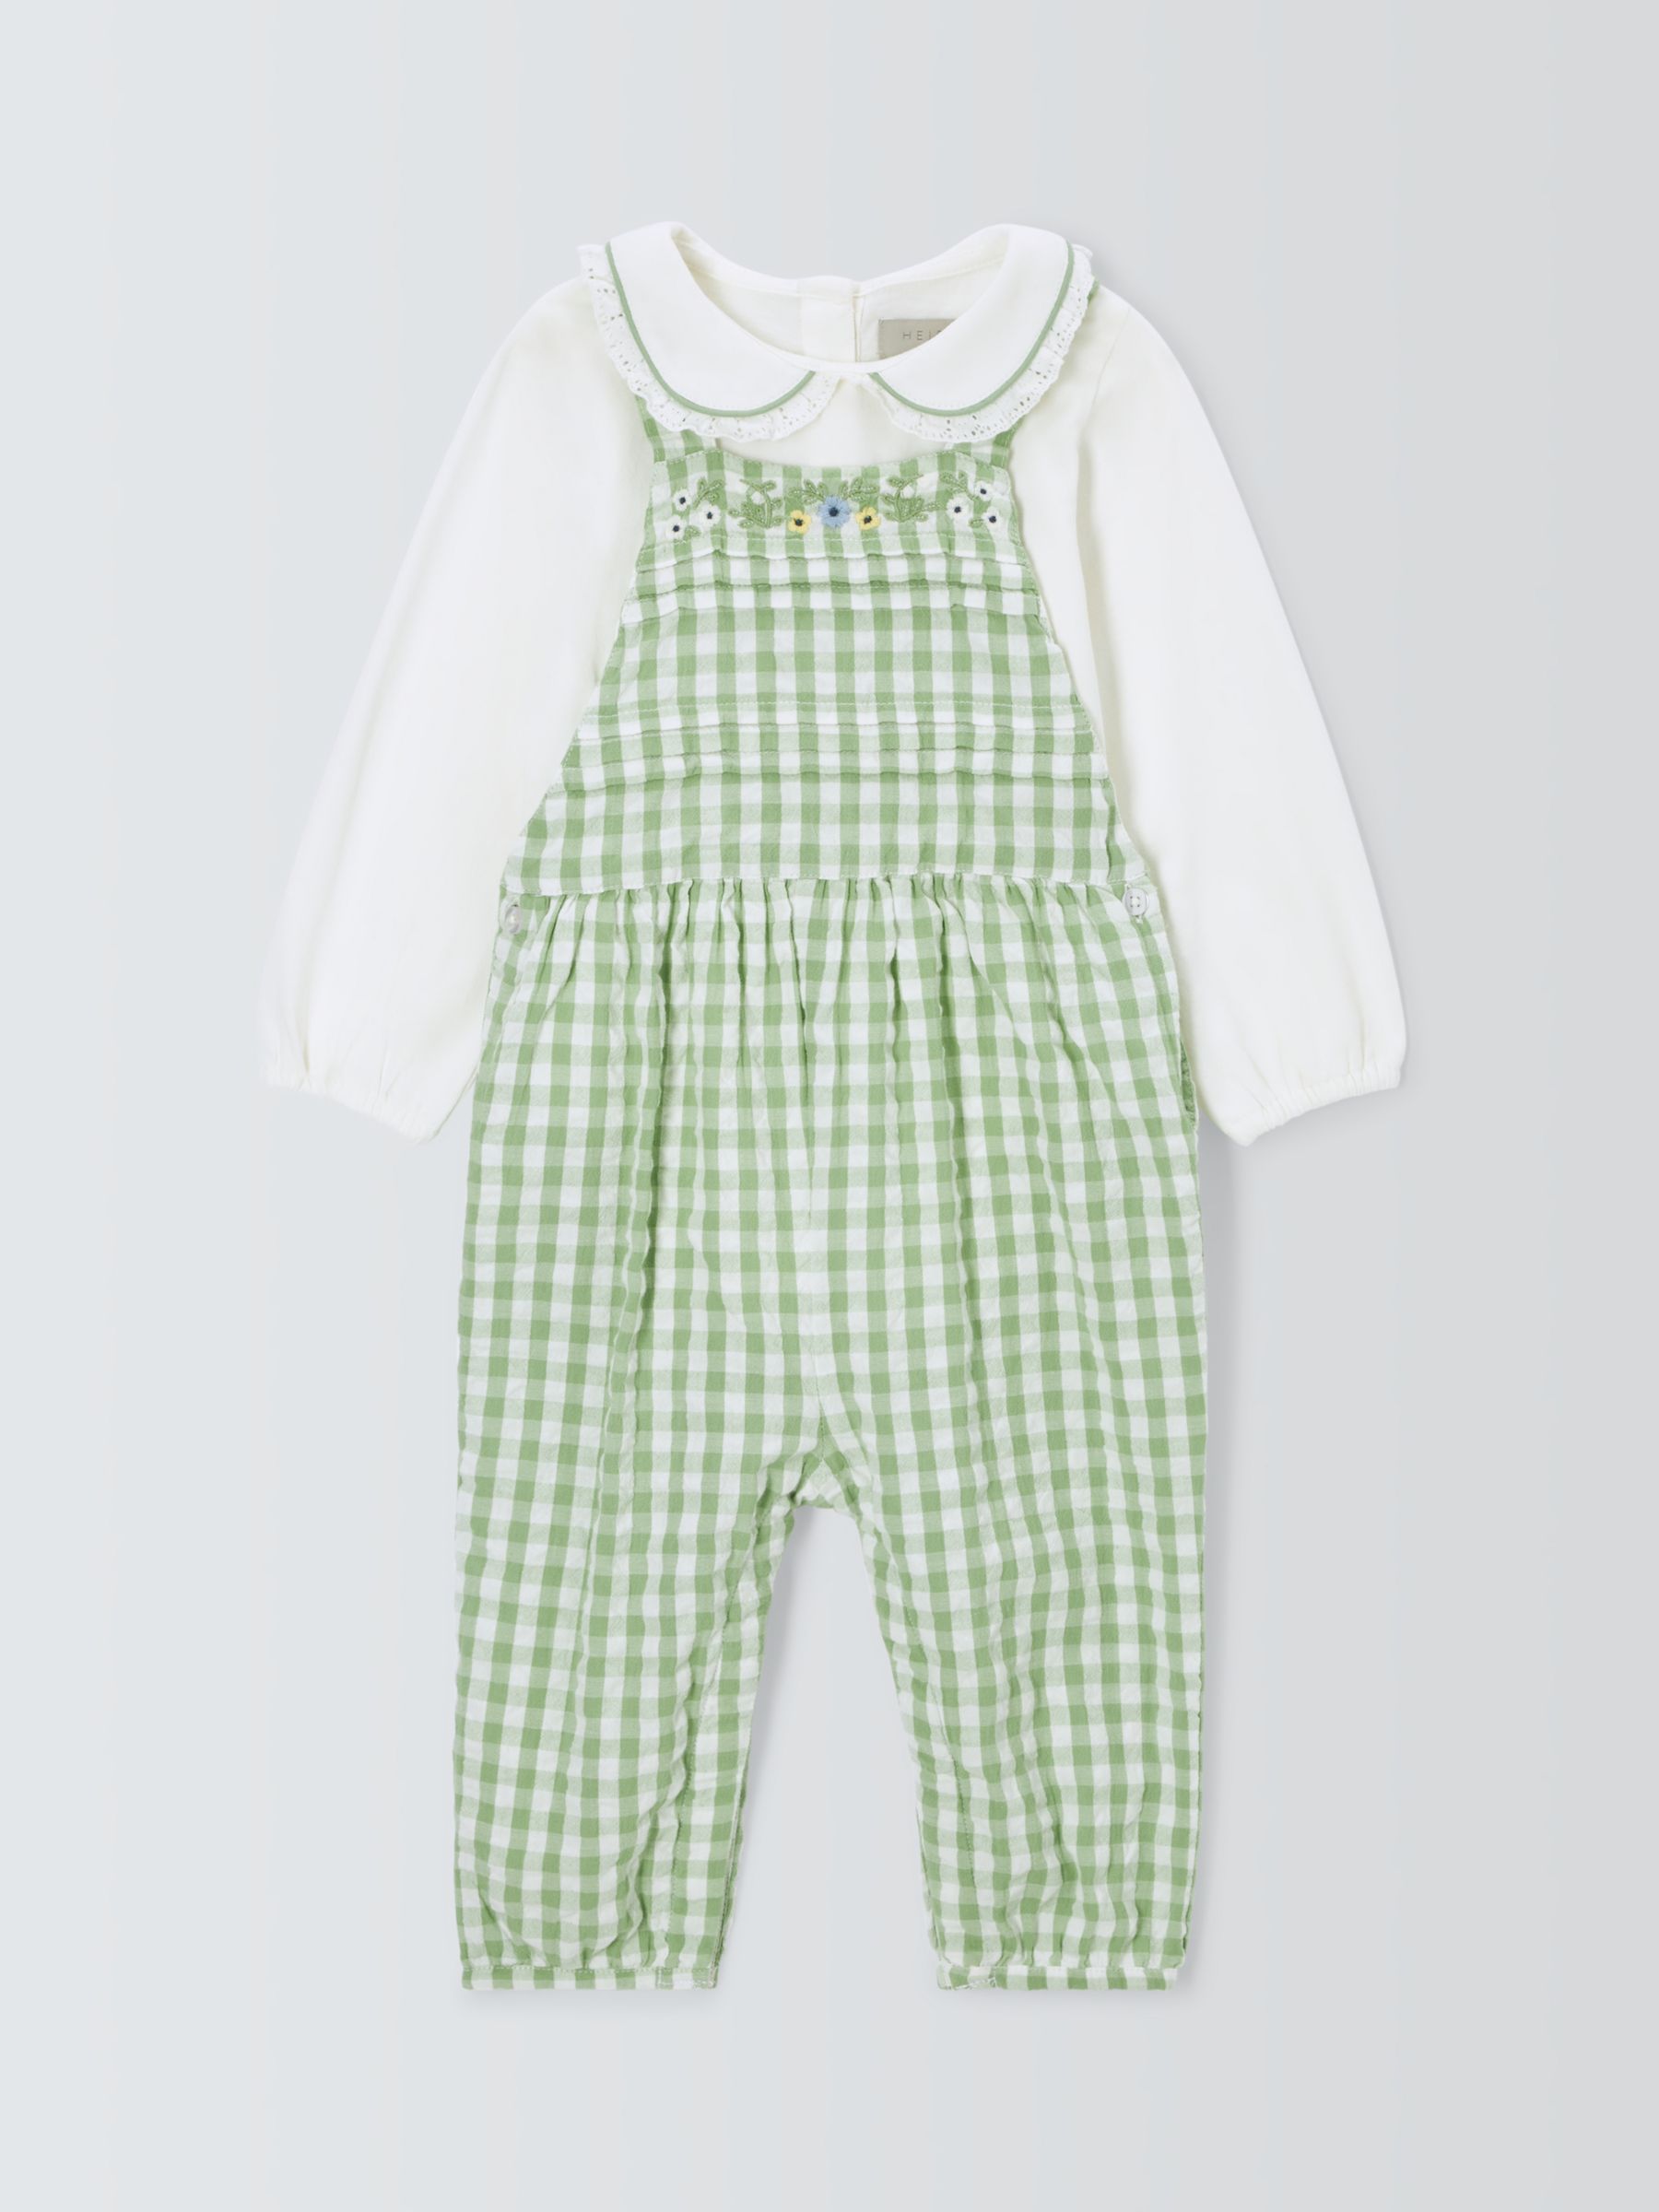 John Lewis Heirloom Collection Baby Blouse & Embroidered Gingham Dungarees, Green/White, 0-3 months